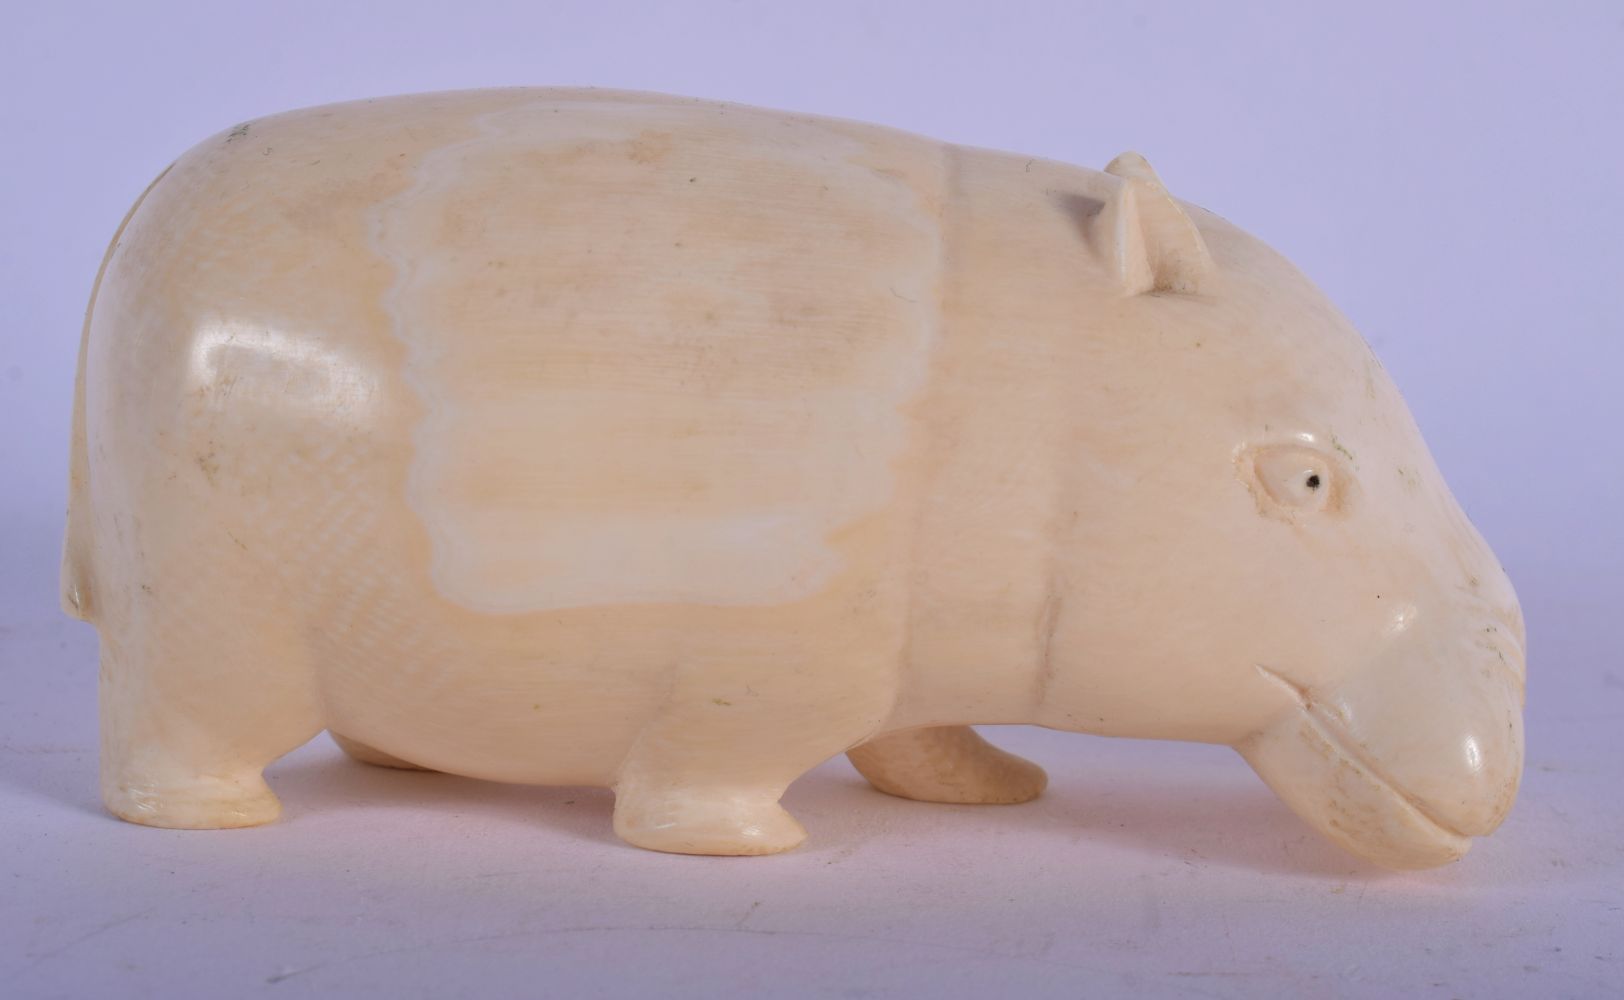 AN EARLY 20TH CENTURY AFRICAN CARVED IVORY FIGURE OF A HIPPO C1920. 9 cm x 4 cm. - Image 2 of 3